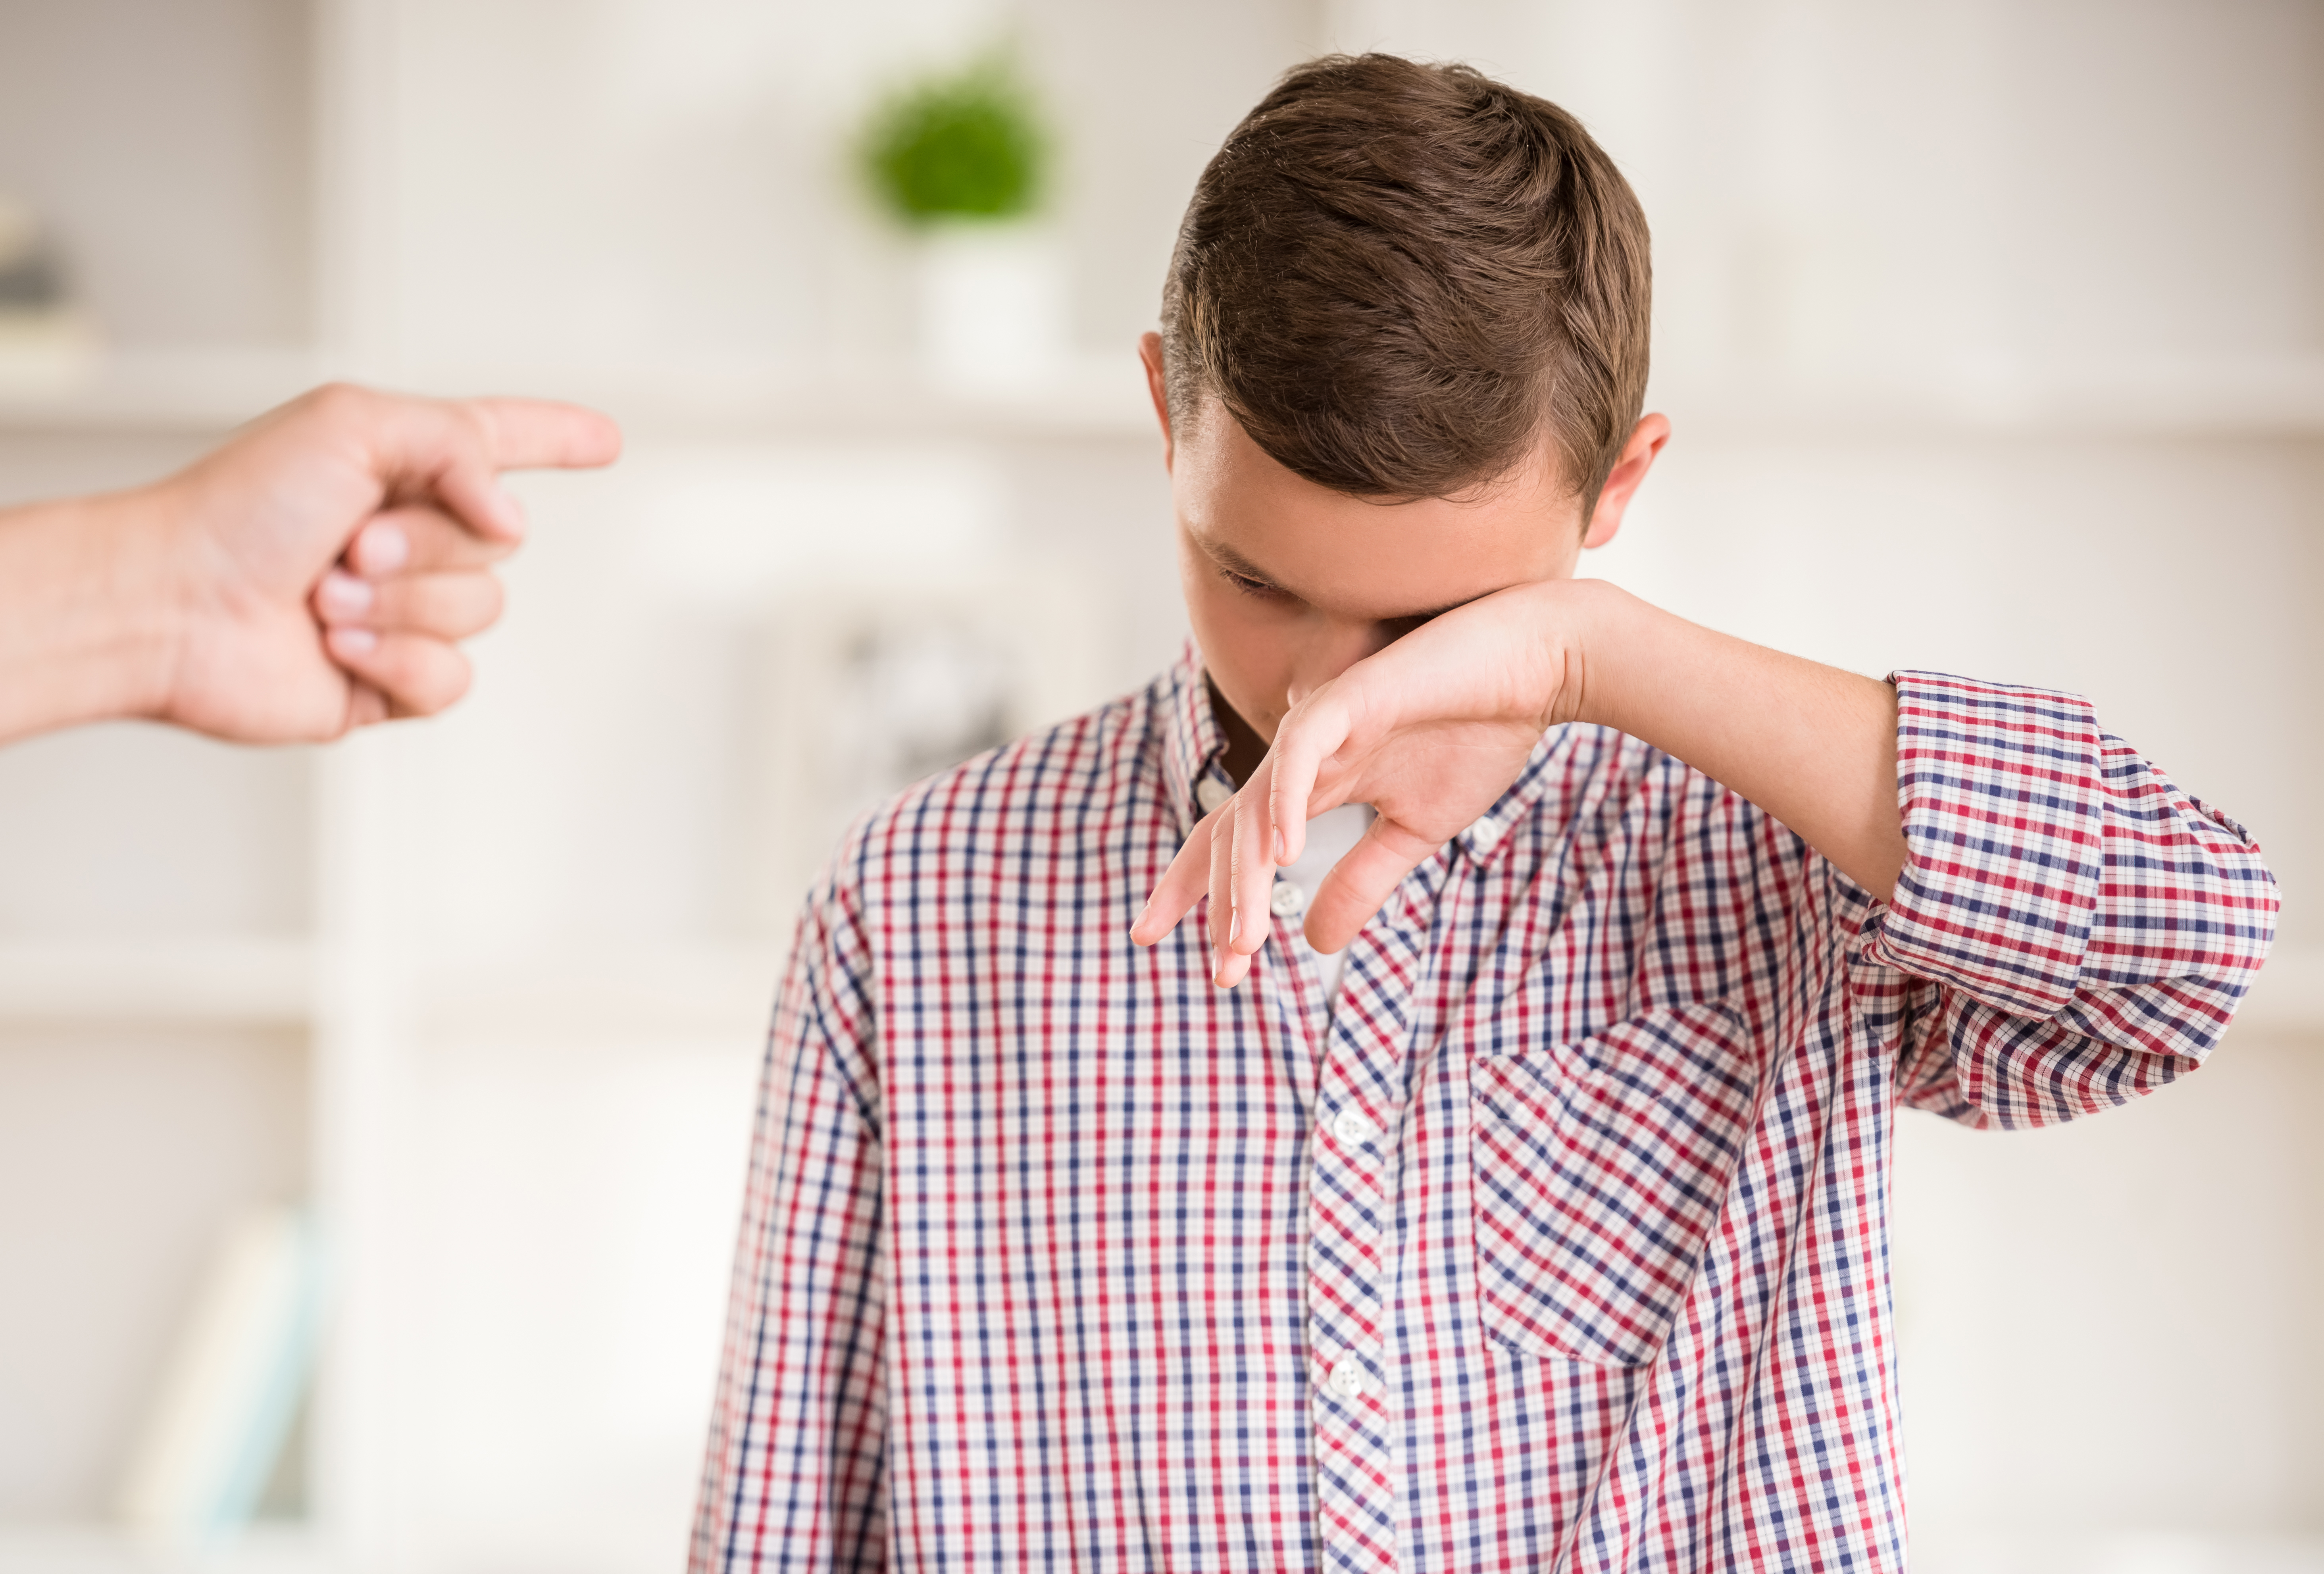 A boy appearing to cry as a finger is pointed at him | Source: Shutterstock